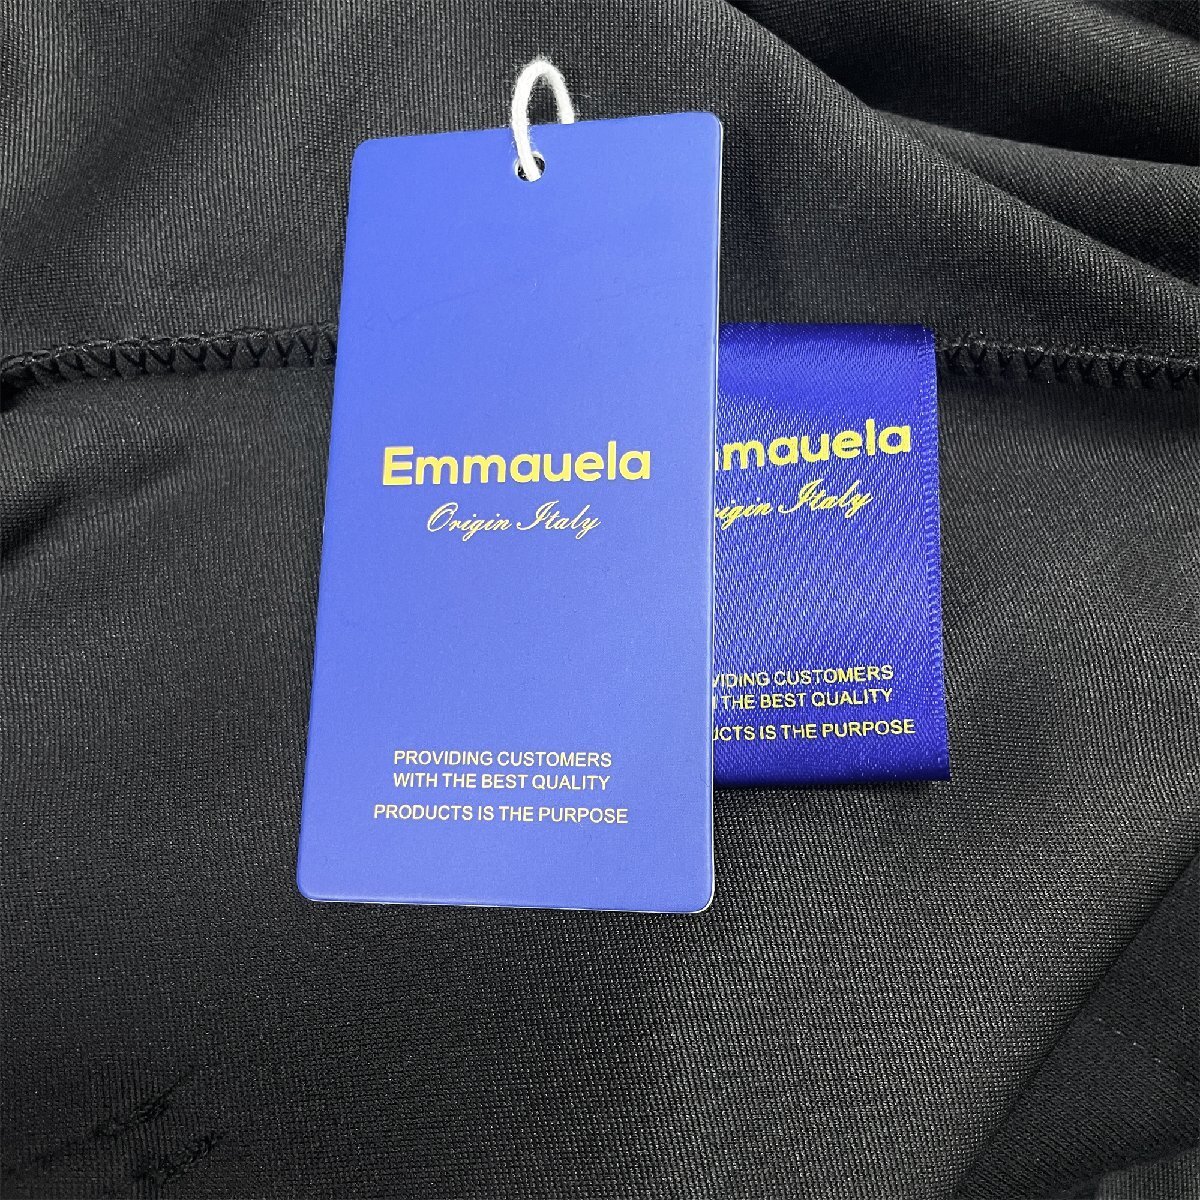  piece .* Parker regular price 4 ten thousand *Emmauela* Italy * milano departure * cotton 100% easy bear pretty body type cover pull over standard 2XL/52 size 